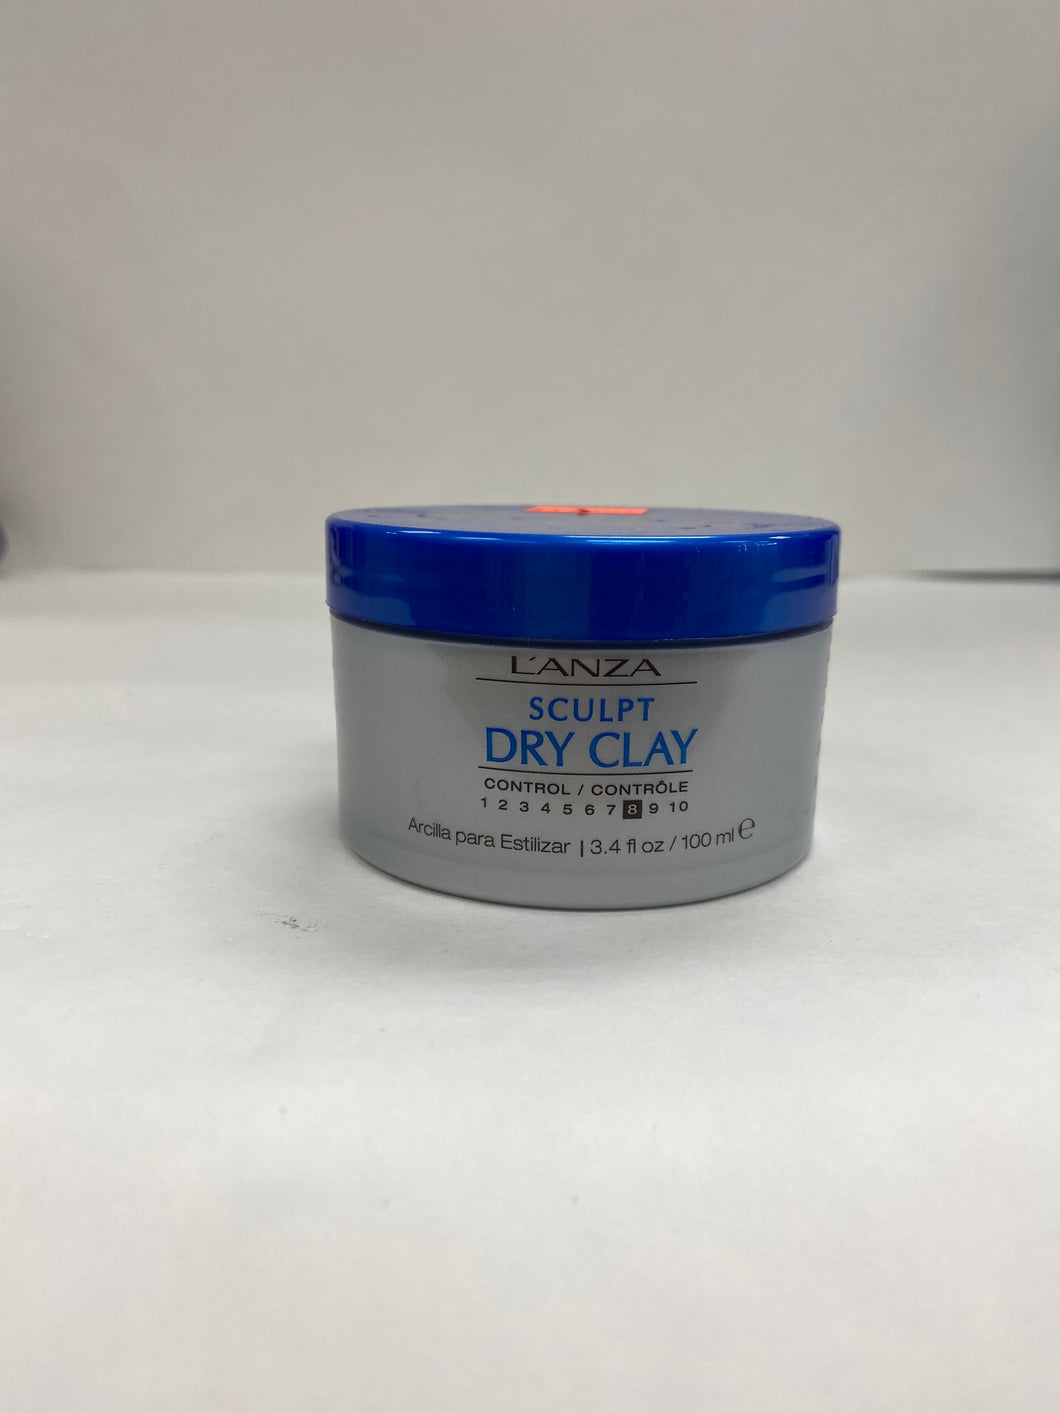 L’anza Healing Style Sculpt Dry Clay